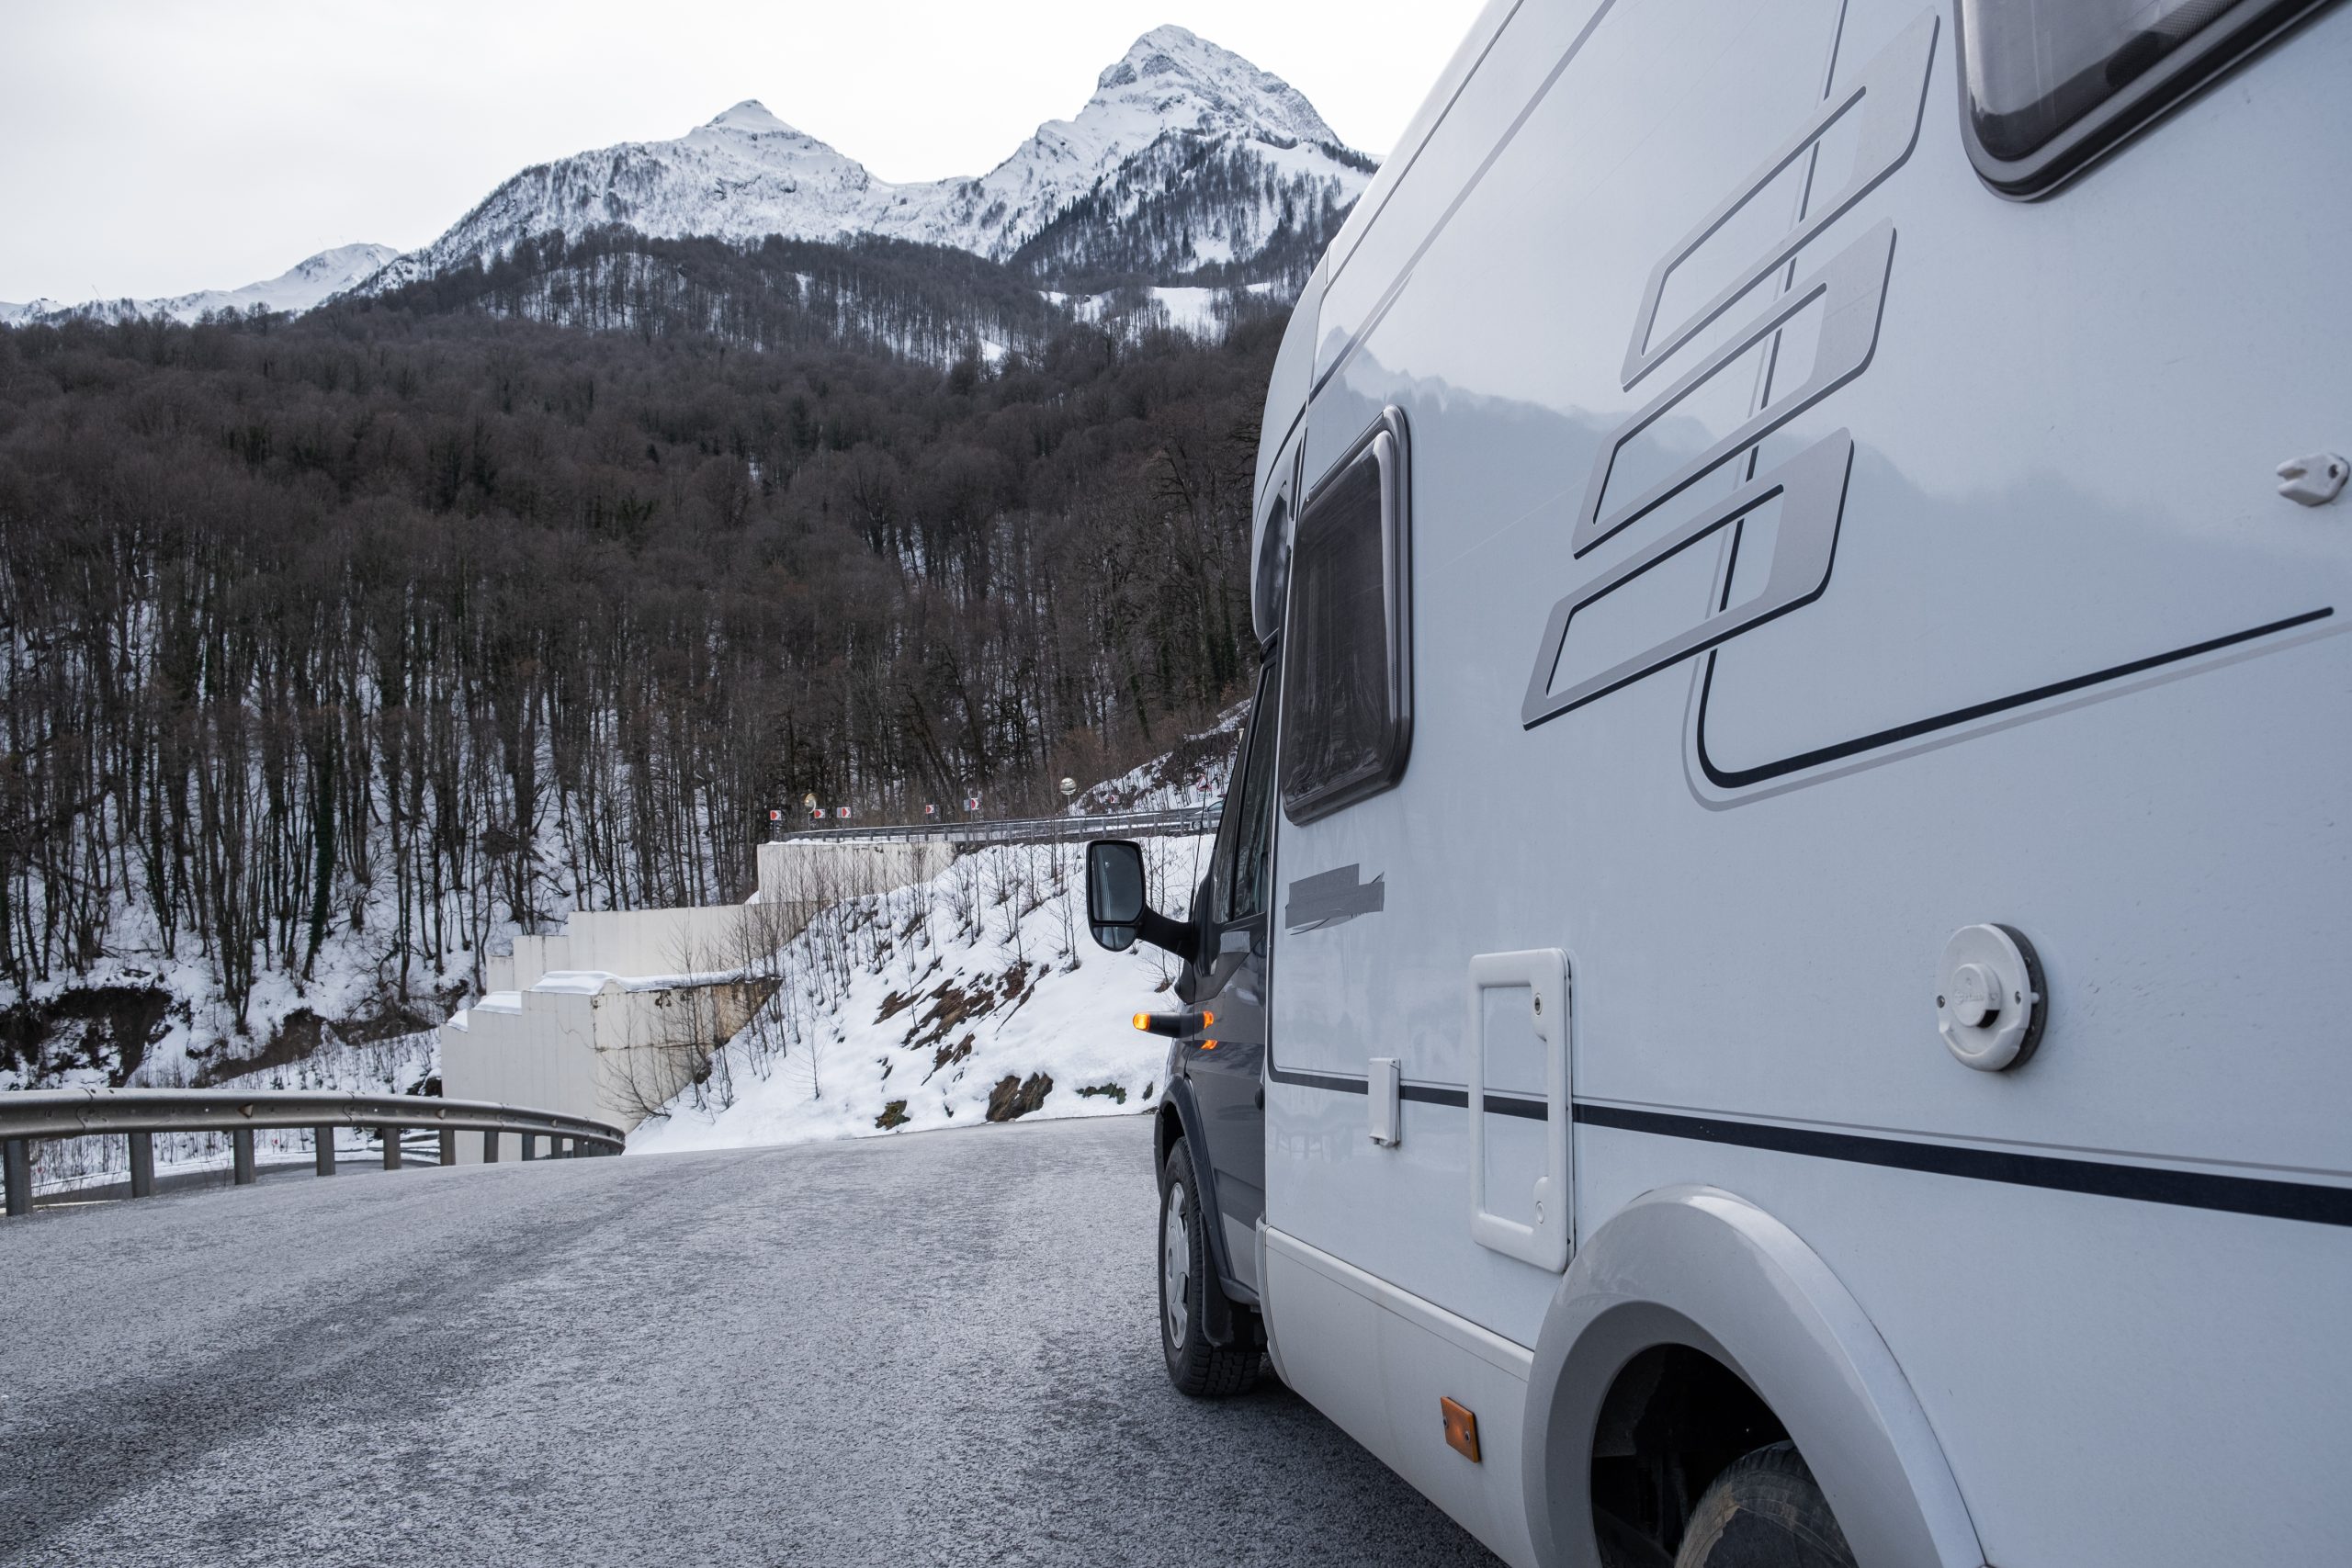 Is a Motorhome a Good Investment? – Pros and Cons of Buying a Motorhome Right Now